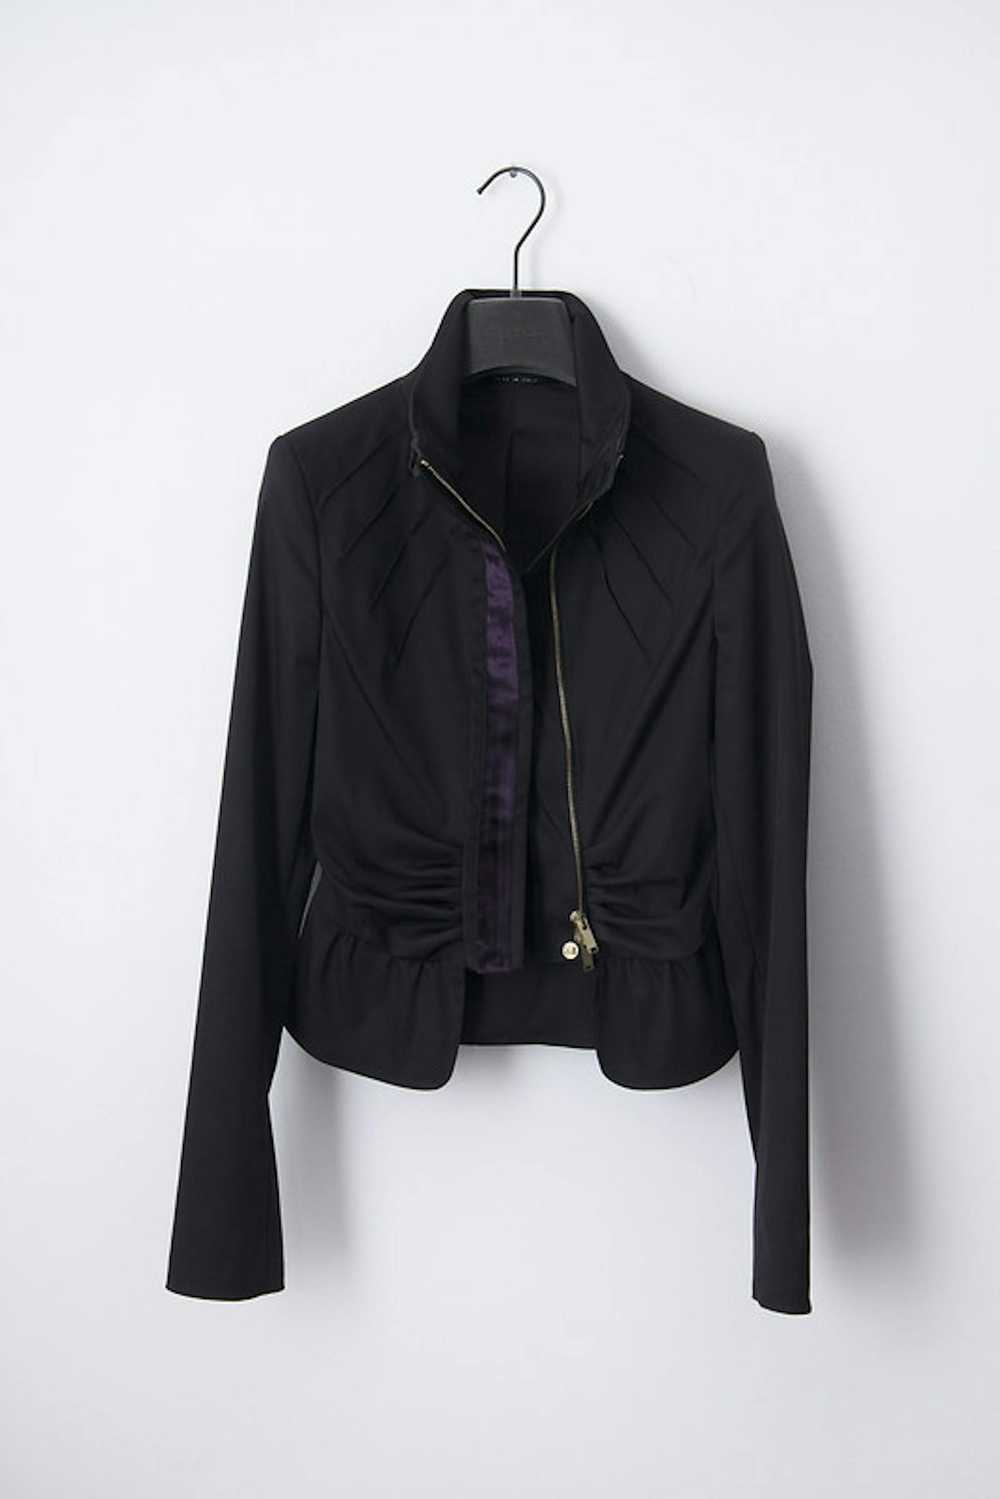 Gucci × Tom Ford AW04 iconic jacket - image 1